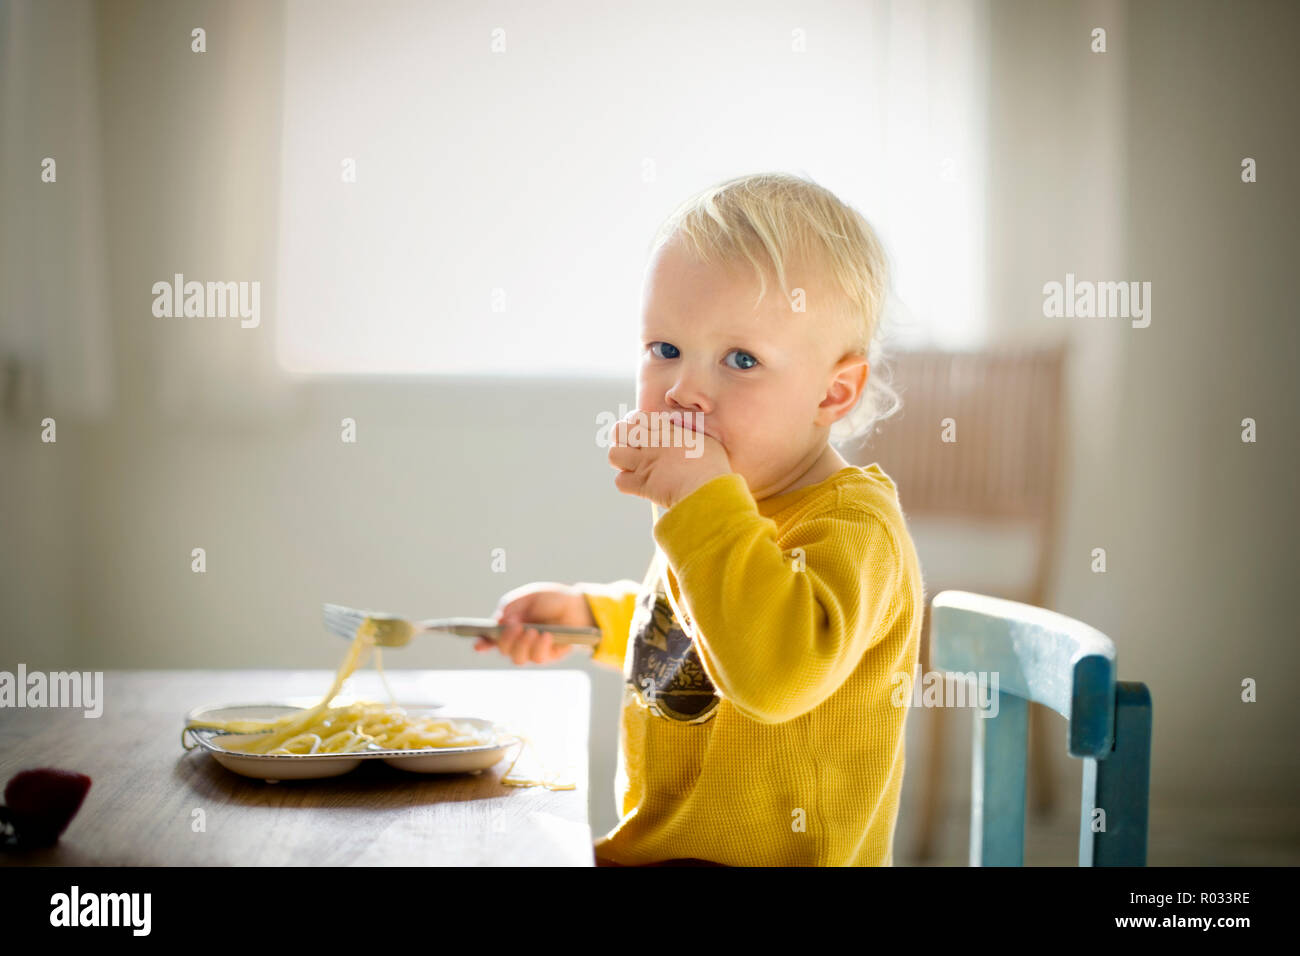 Portrait of a young toddler sitting at a dining table eating a plate of plain spaghetti. Stock Photo